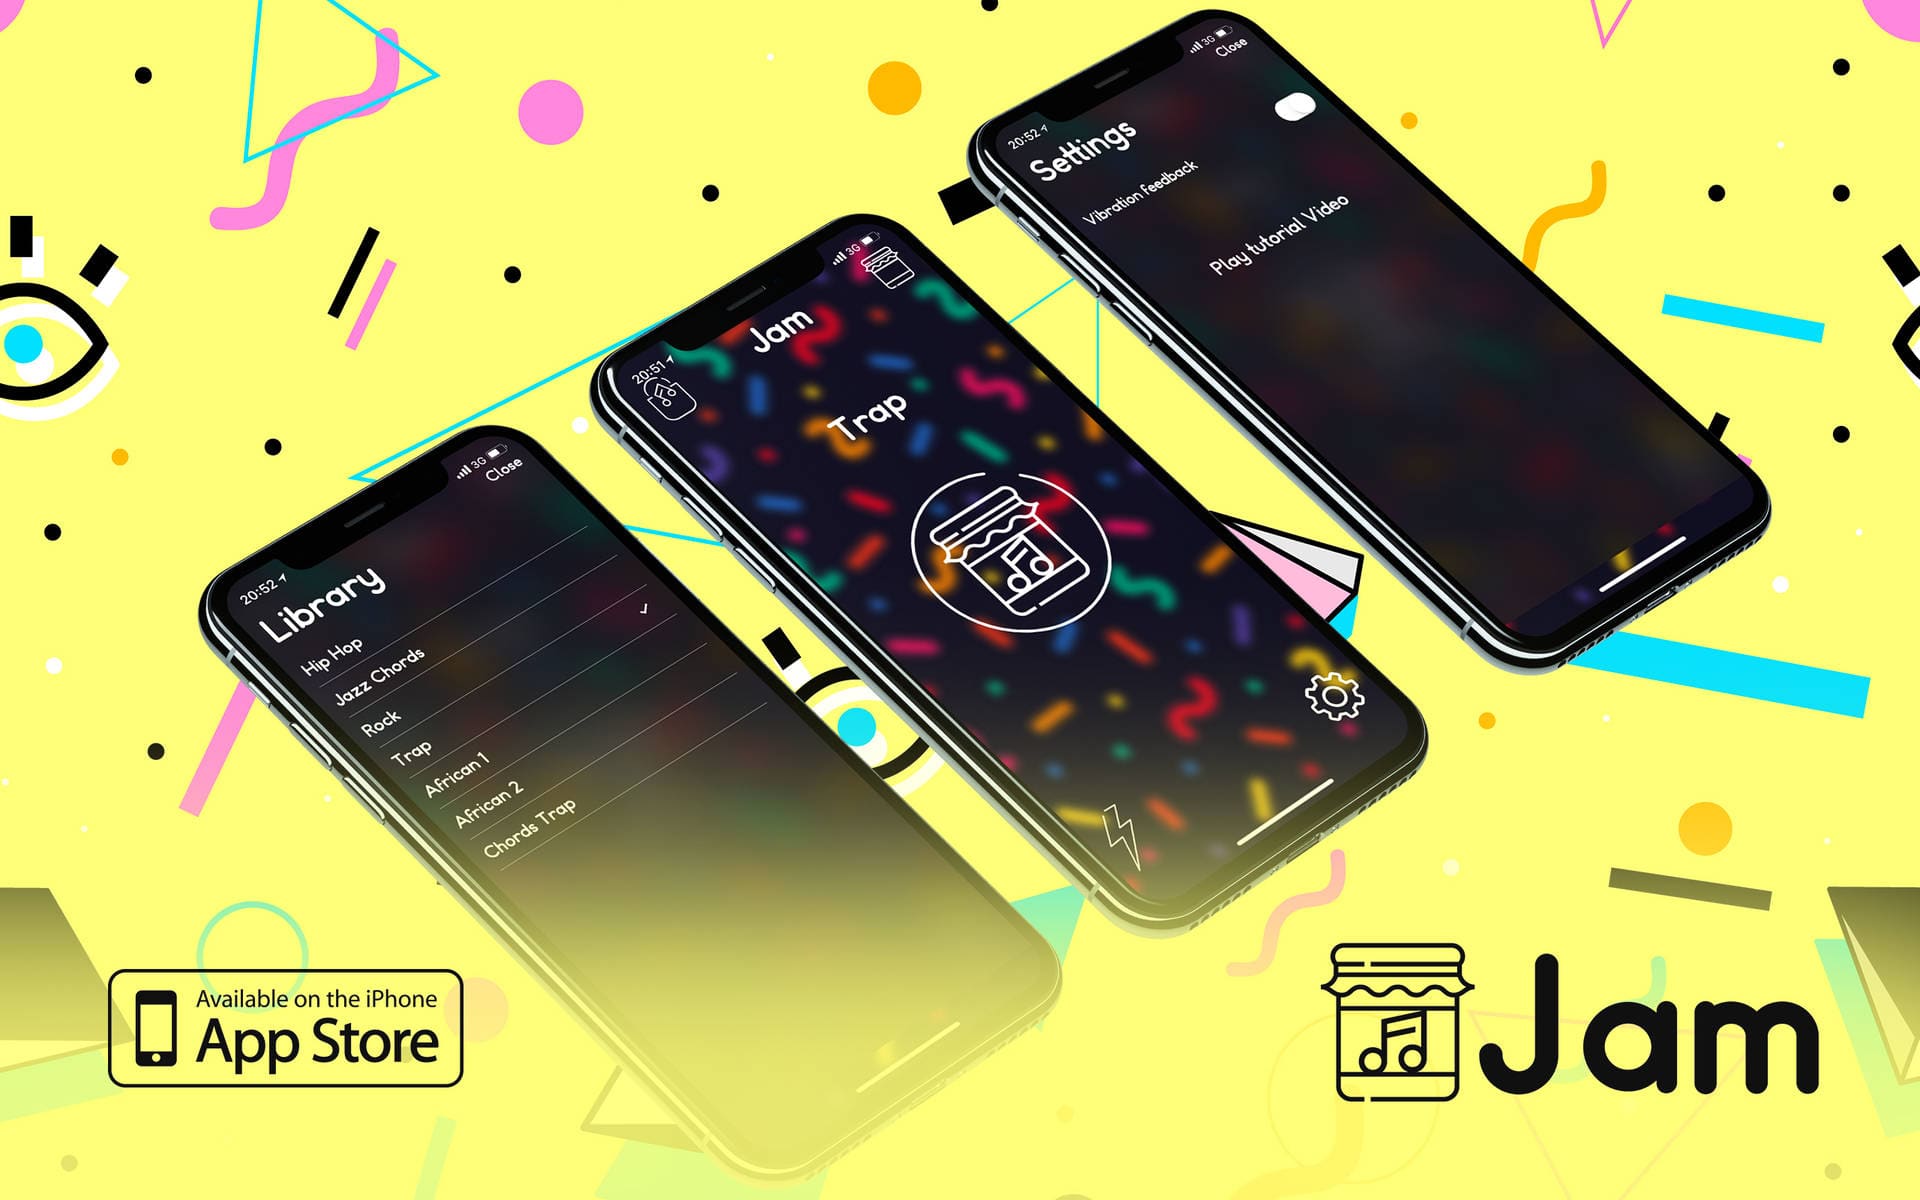 JAM: THE APPLICATION THAT TURNS YOUR MOVEMENT INTO MUSIC